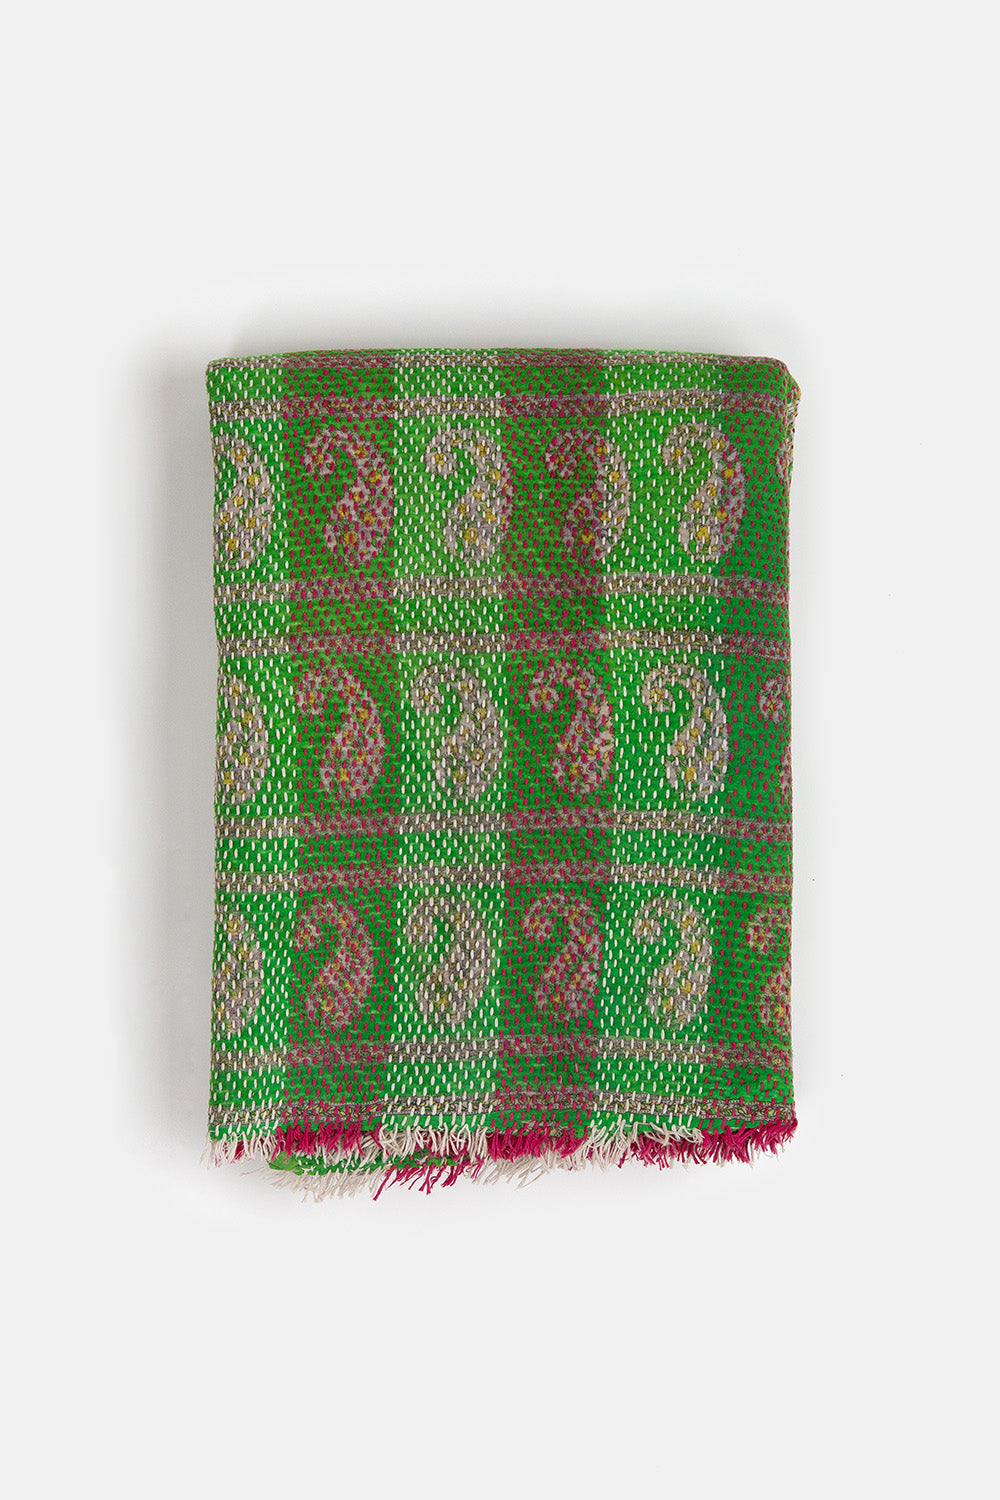 Vintage Kantha Quilt in Emerald Paisley